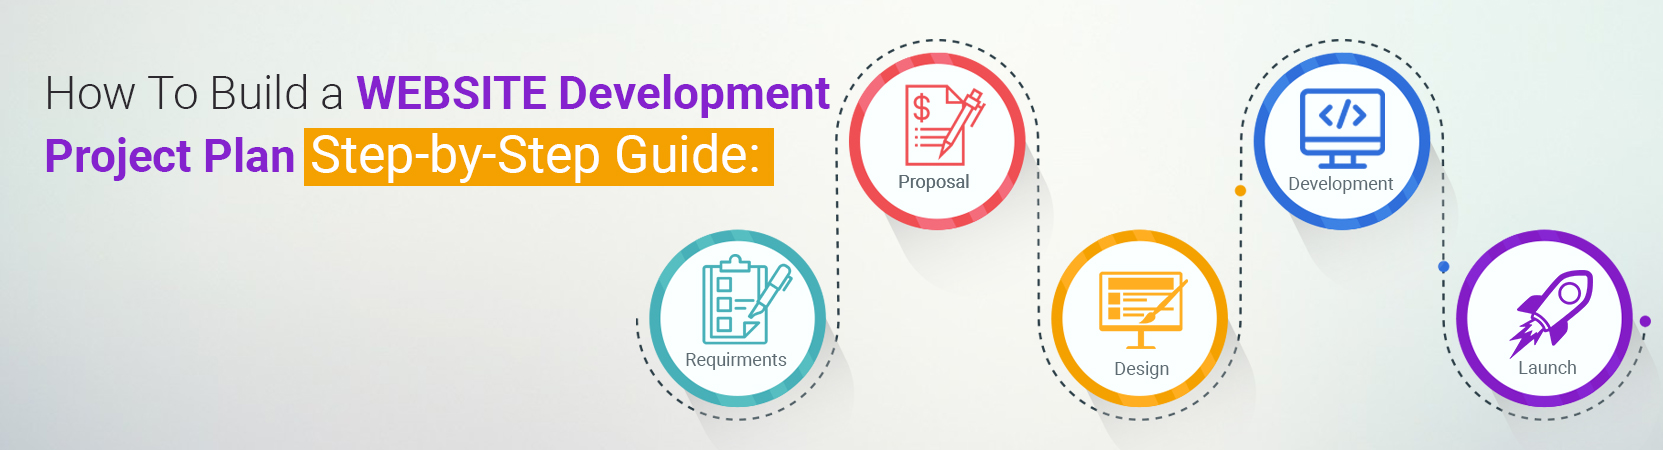 Steps to start a project to provide website development services to companies - Develop a business plan and set project goals